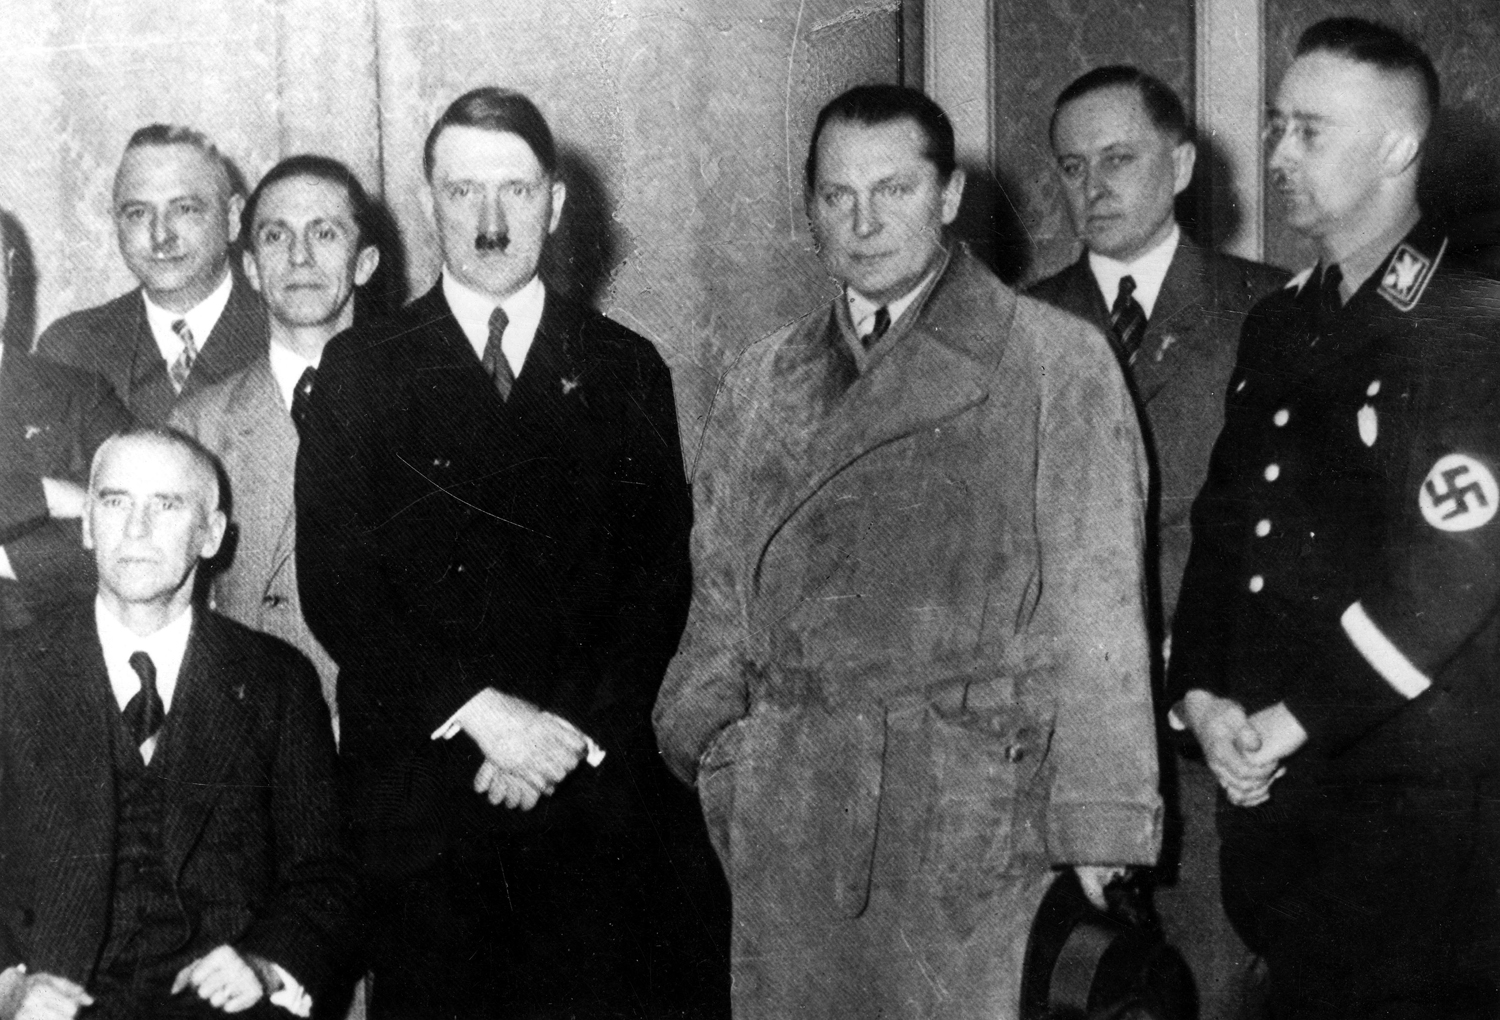 Wilhelm Frick, Hermann Göring, and Hitler on the day he was named Chancellor of Germany